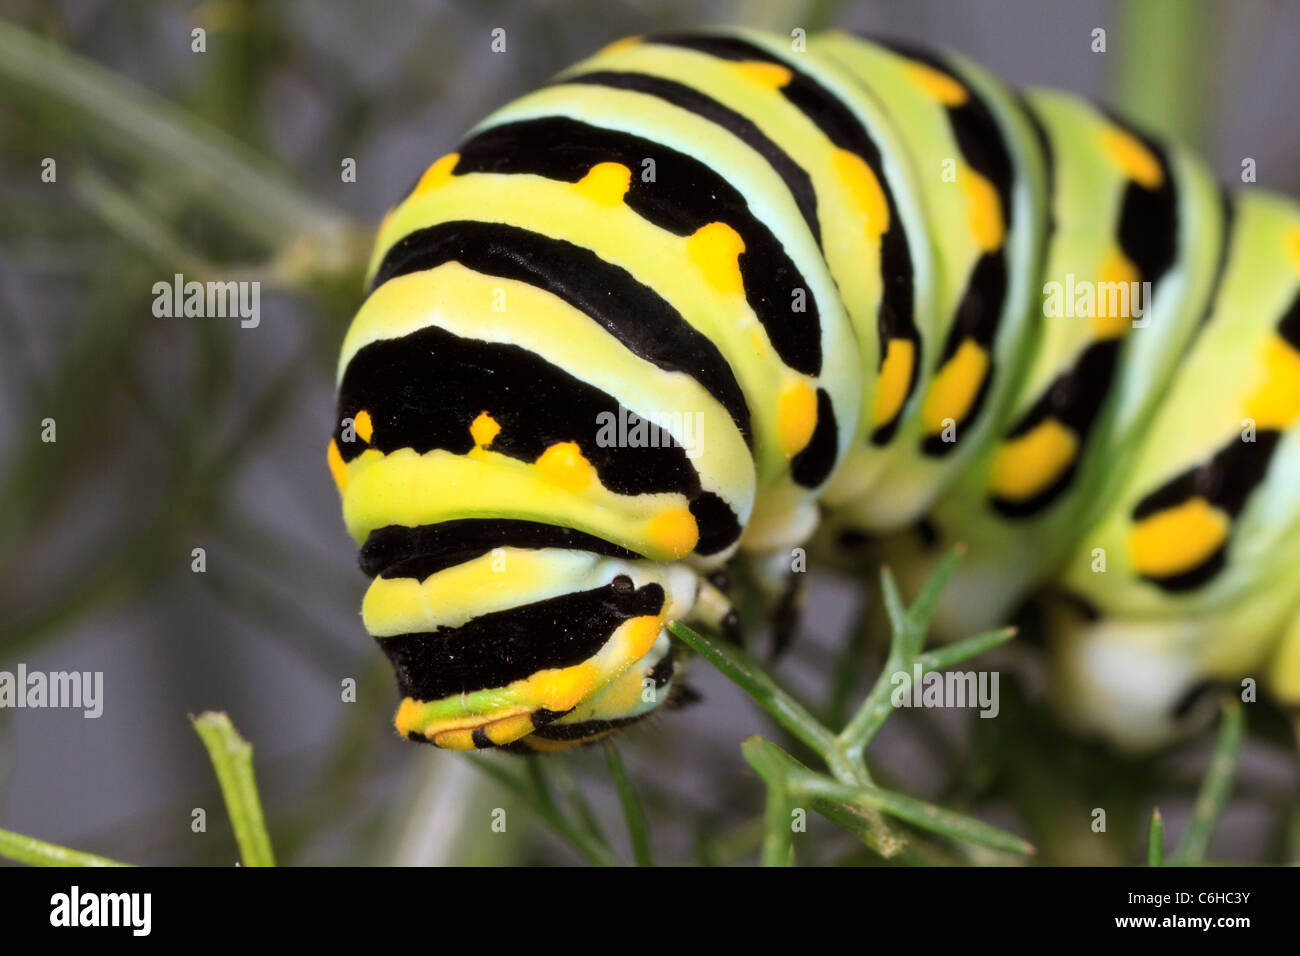 Caterpillar of the black swallowtail butterfly (Papilio polyxenes). Stock Photo